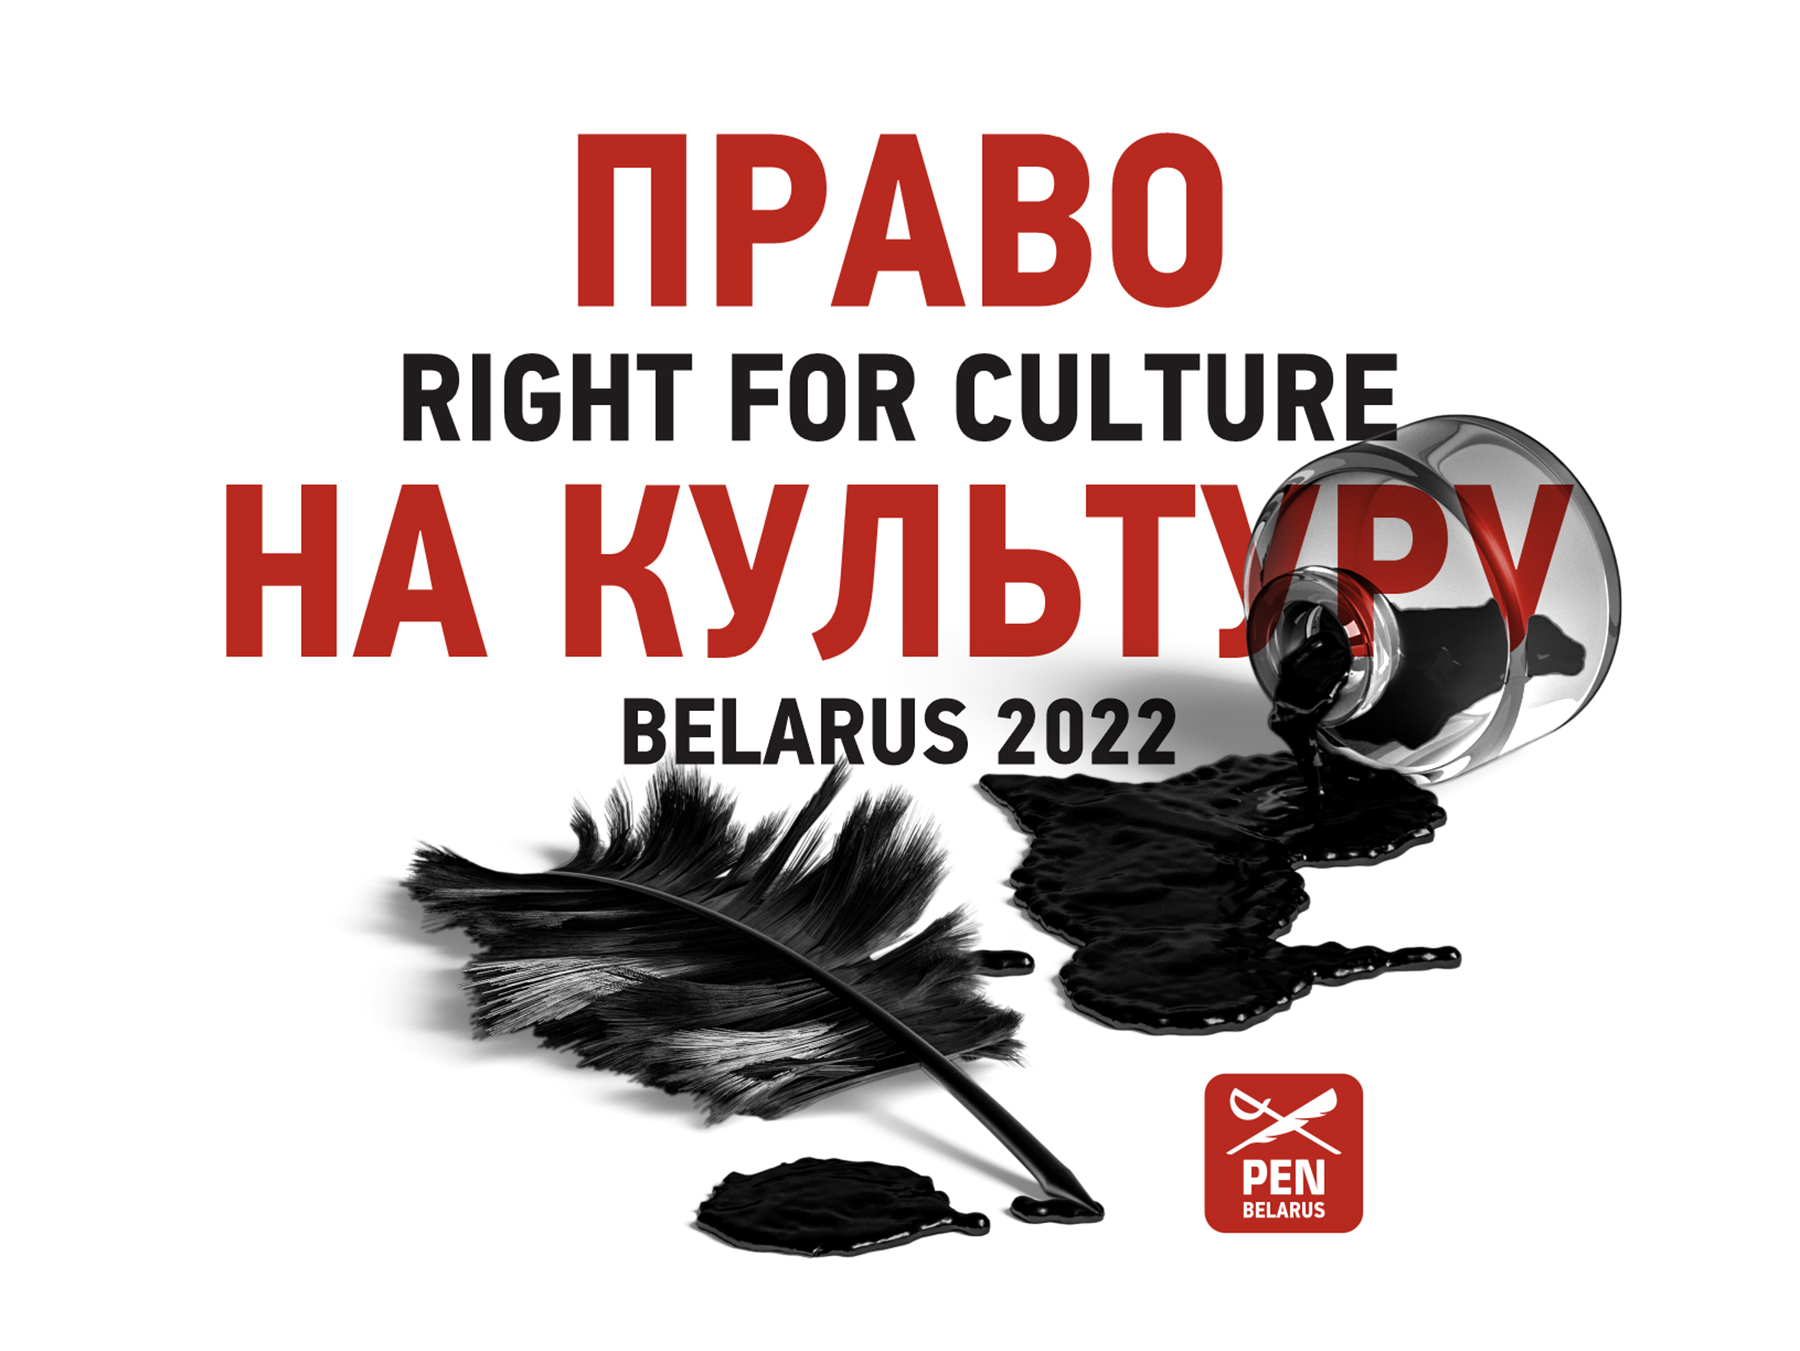 Right for Culture. Belarus 2022